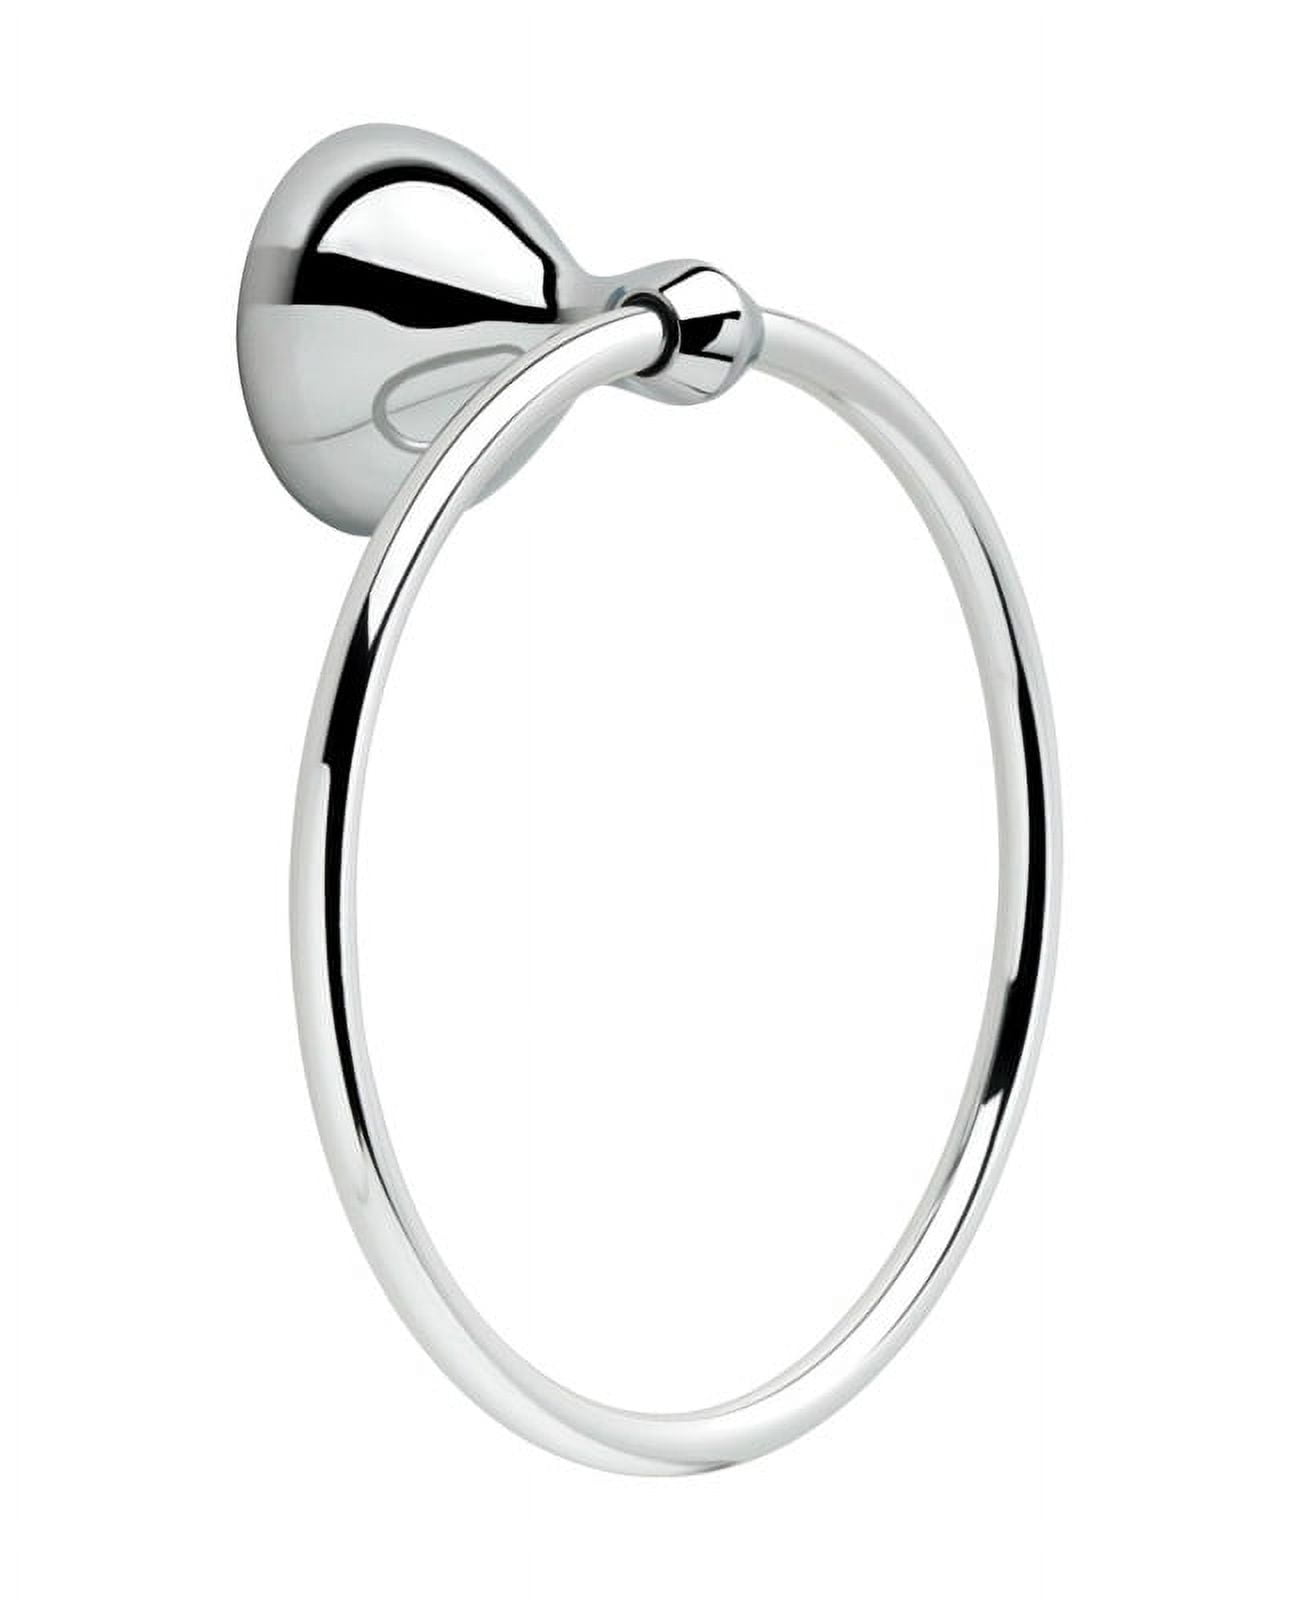 4900882 Foundations Chrome Towel Ring